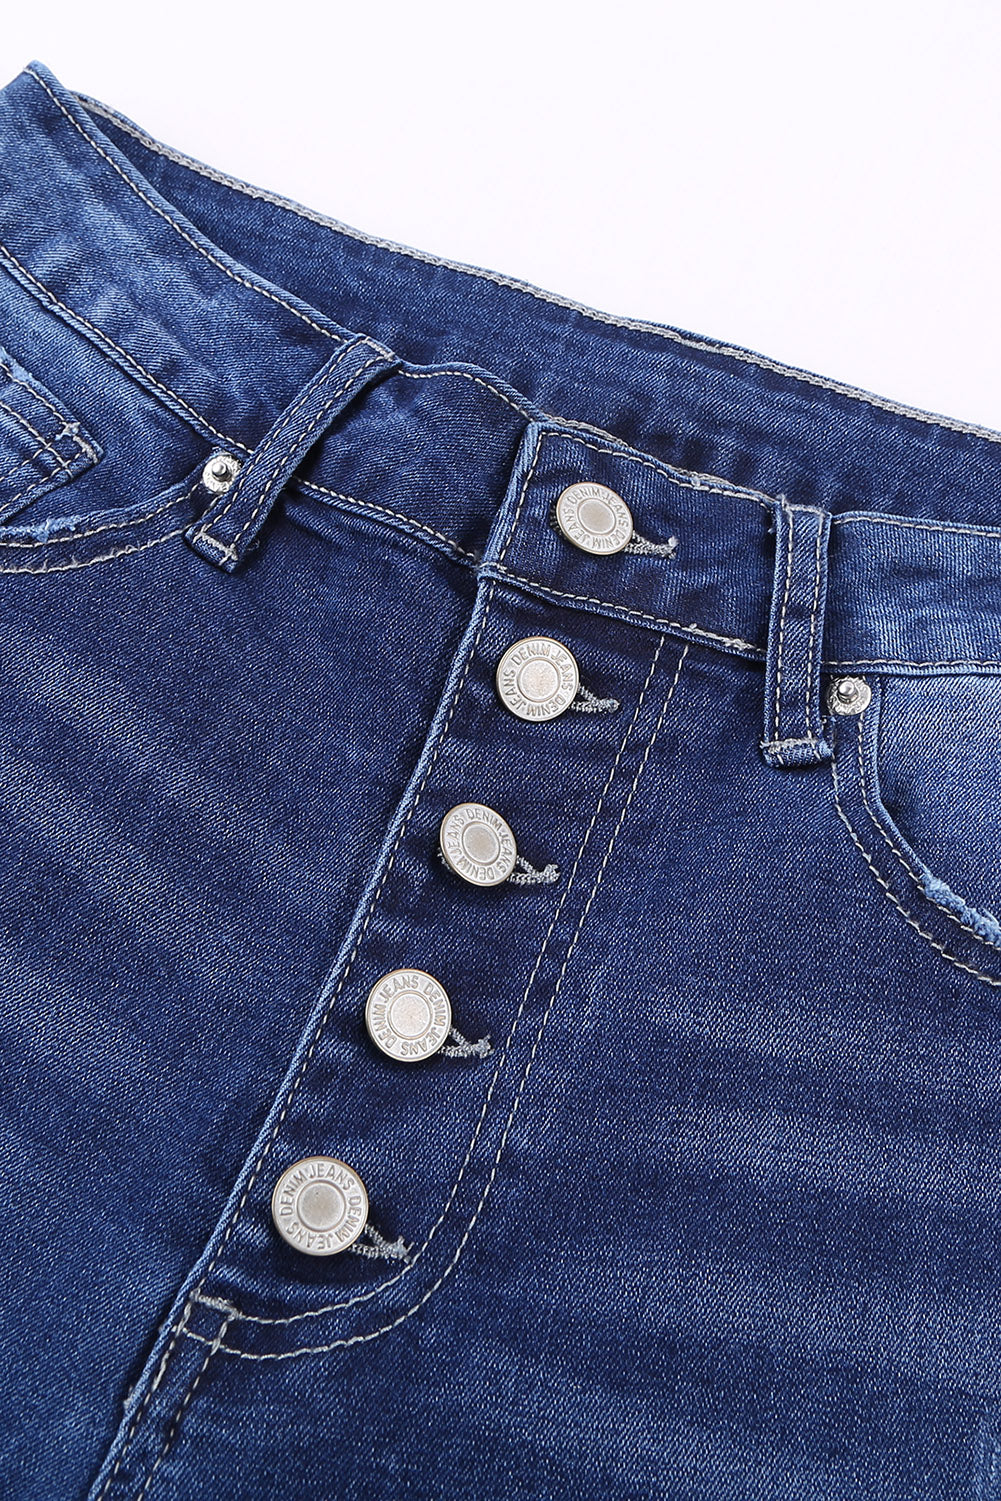 Baeful What You Want Button Fly Pocket Jeans Trendsi